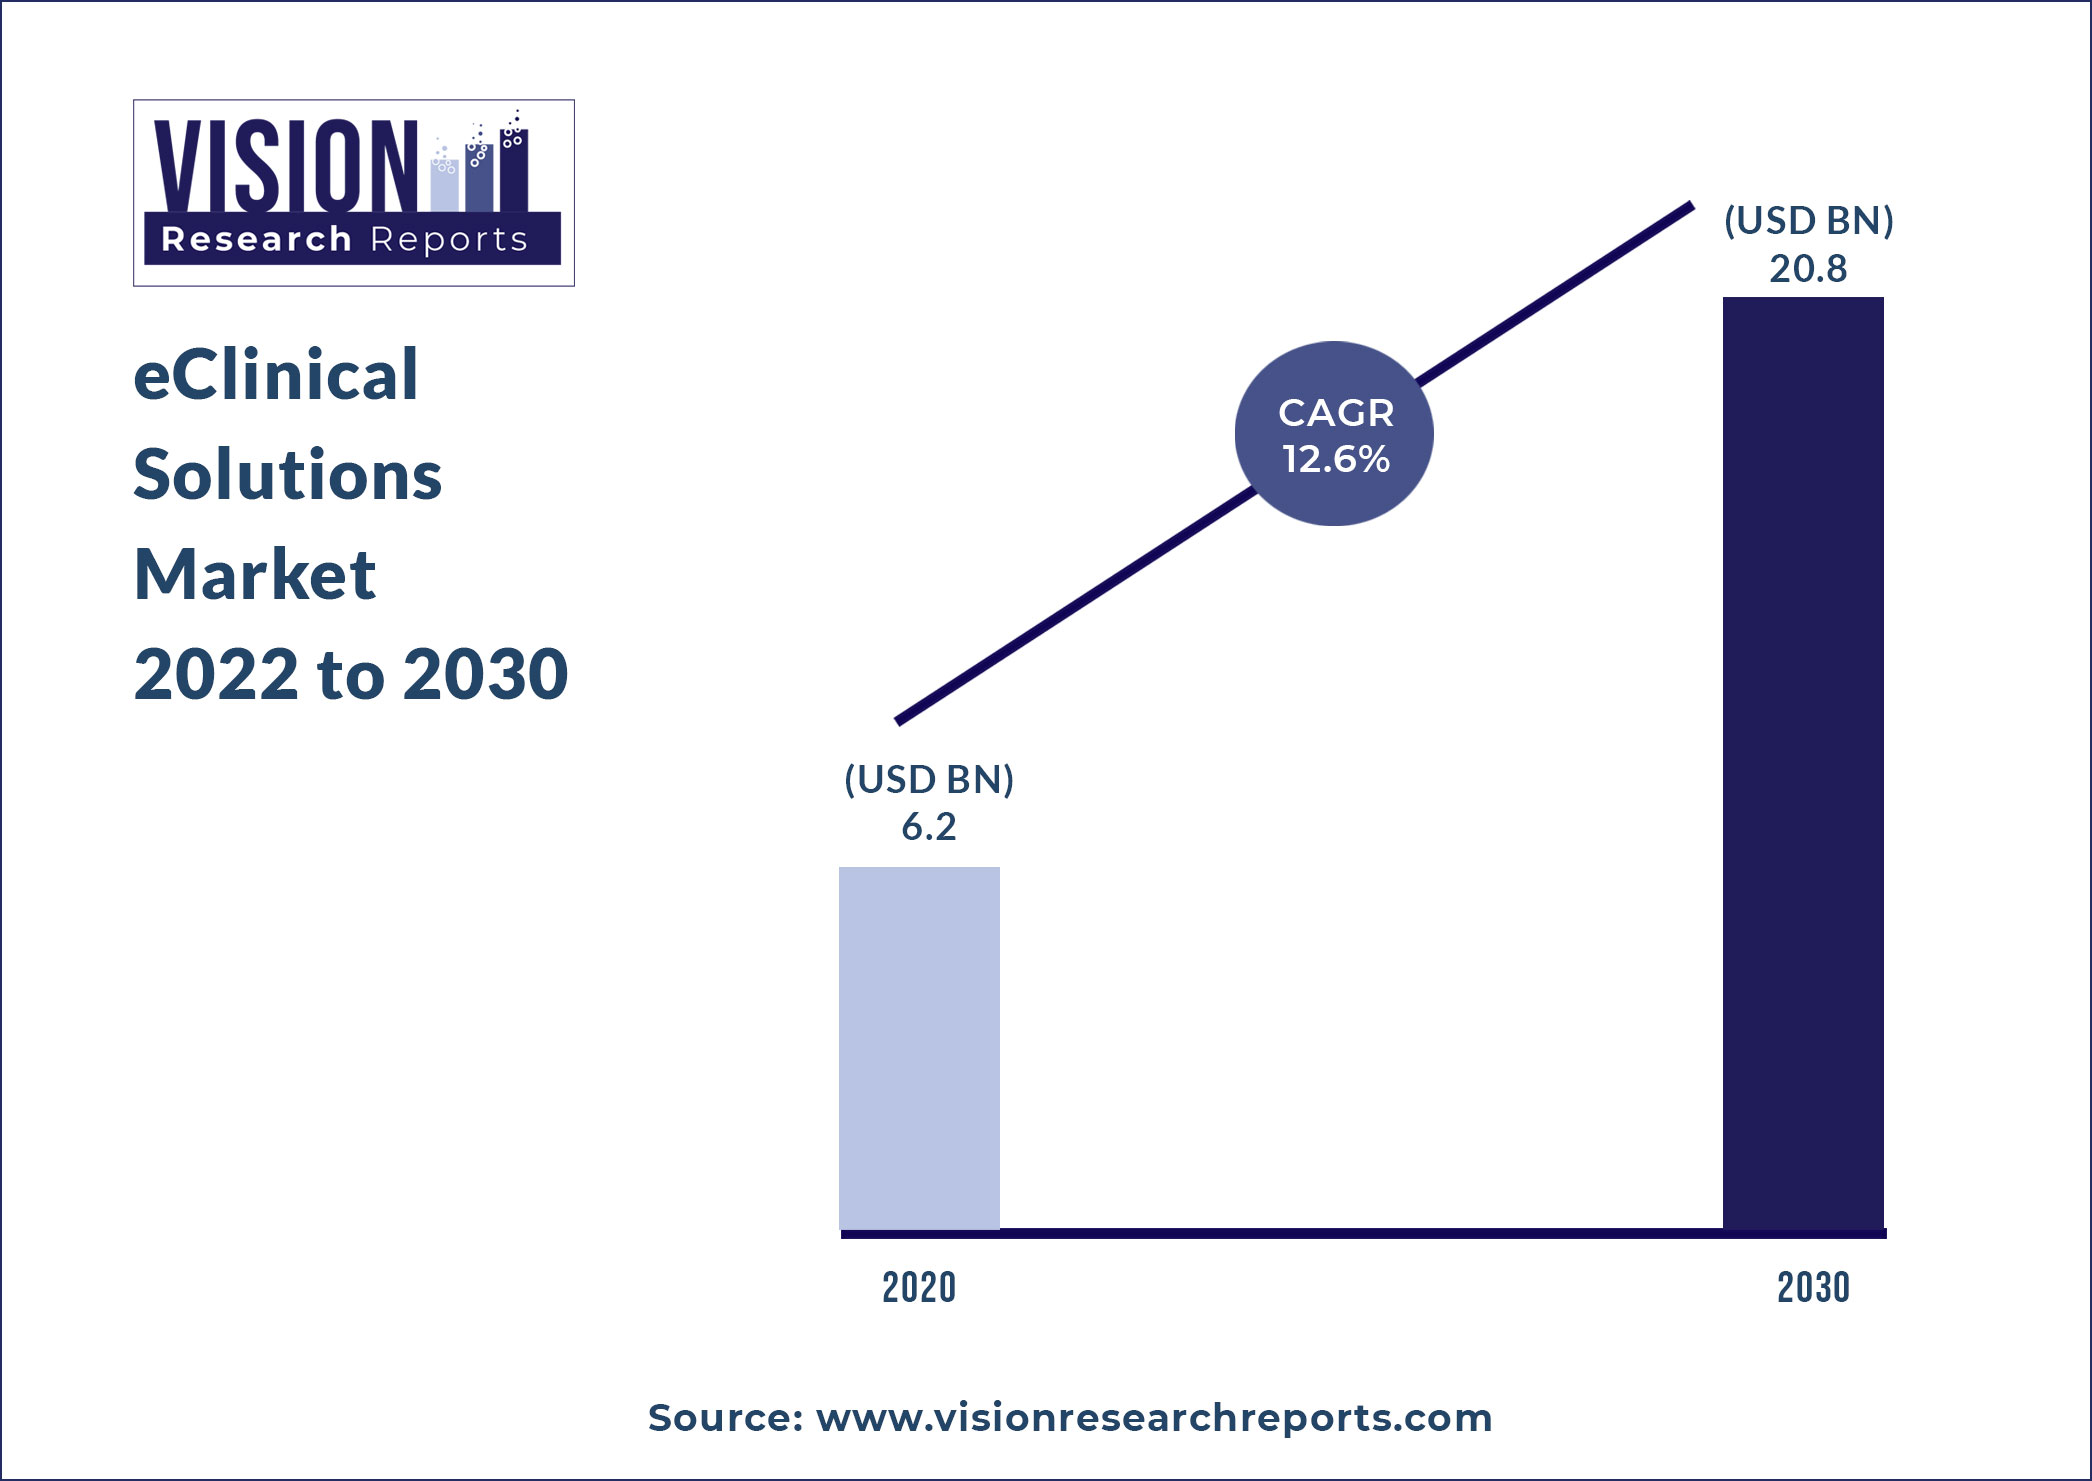 eClinical Solutions Market Size 2022 to 2030